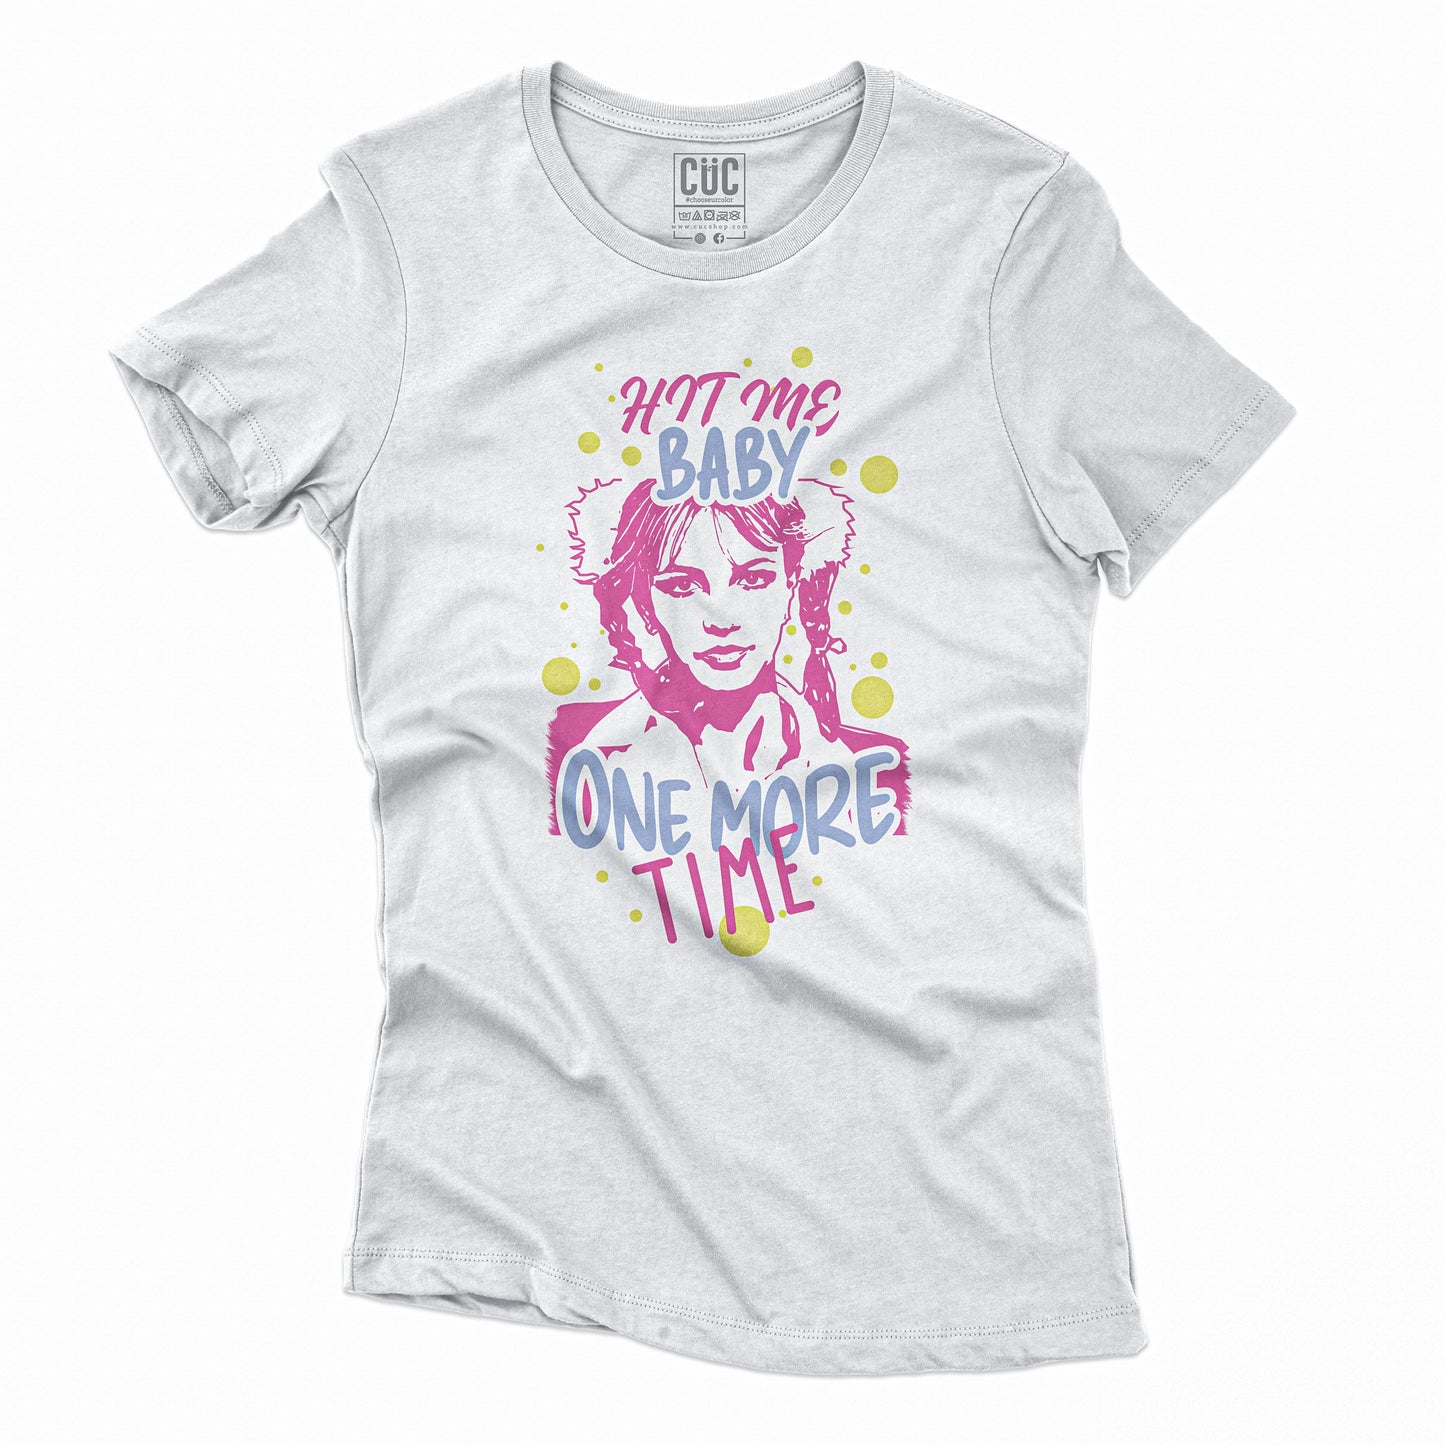 CUC T-Shirt HIT ME BABY - Britney Spears - Iconic   #chooseurcolor